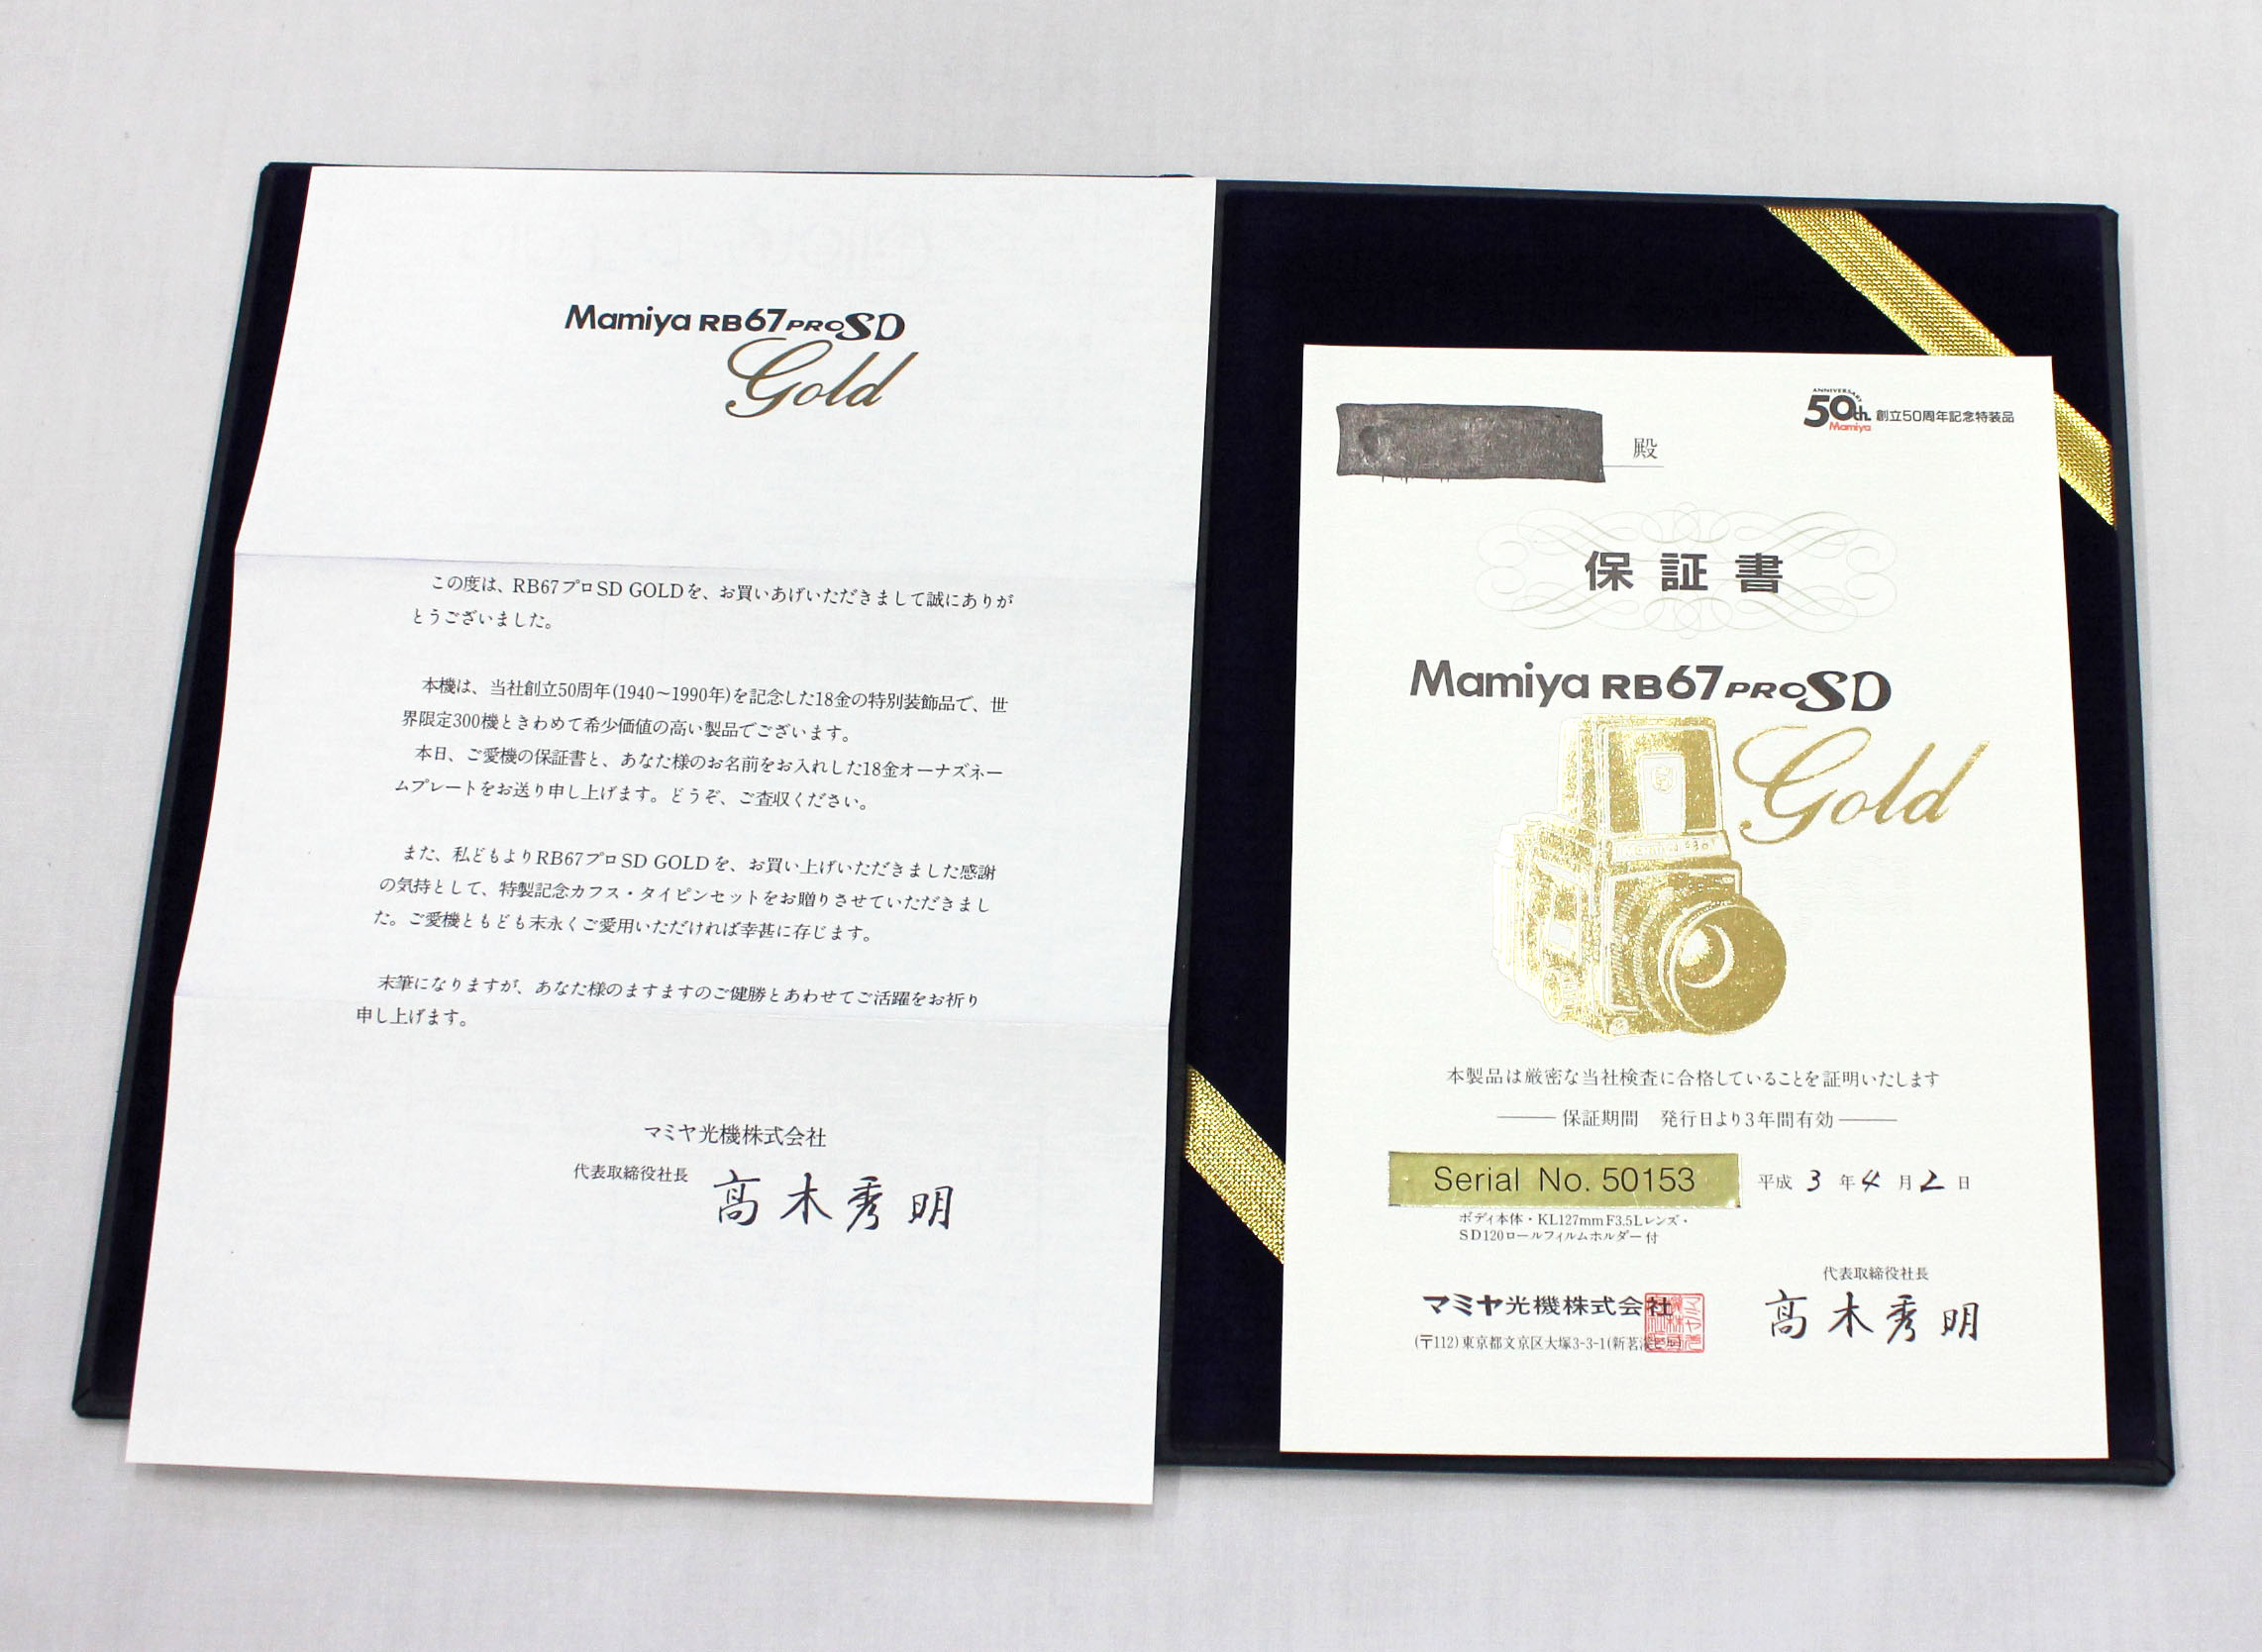 Mamiya RB67 Pro SD Gold K/L 127mm F/3.5 50 Years Limited Edition of 300 from Japan Photo 23